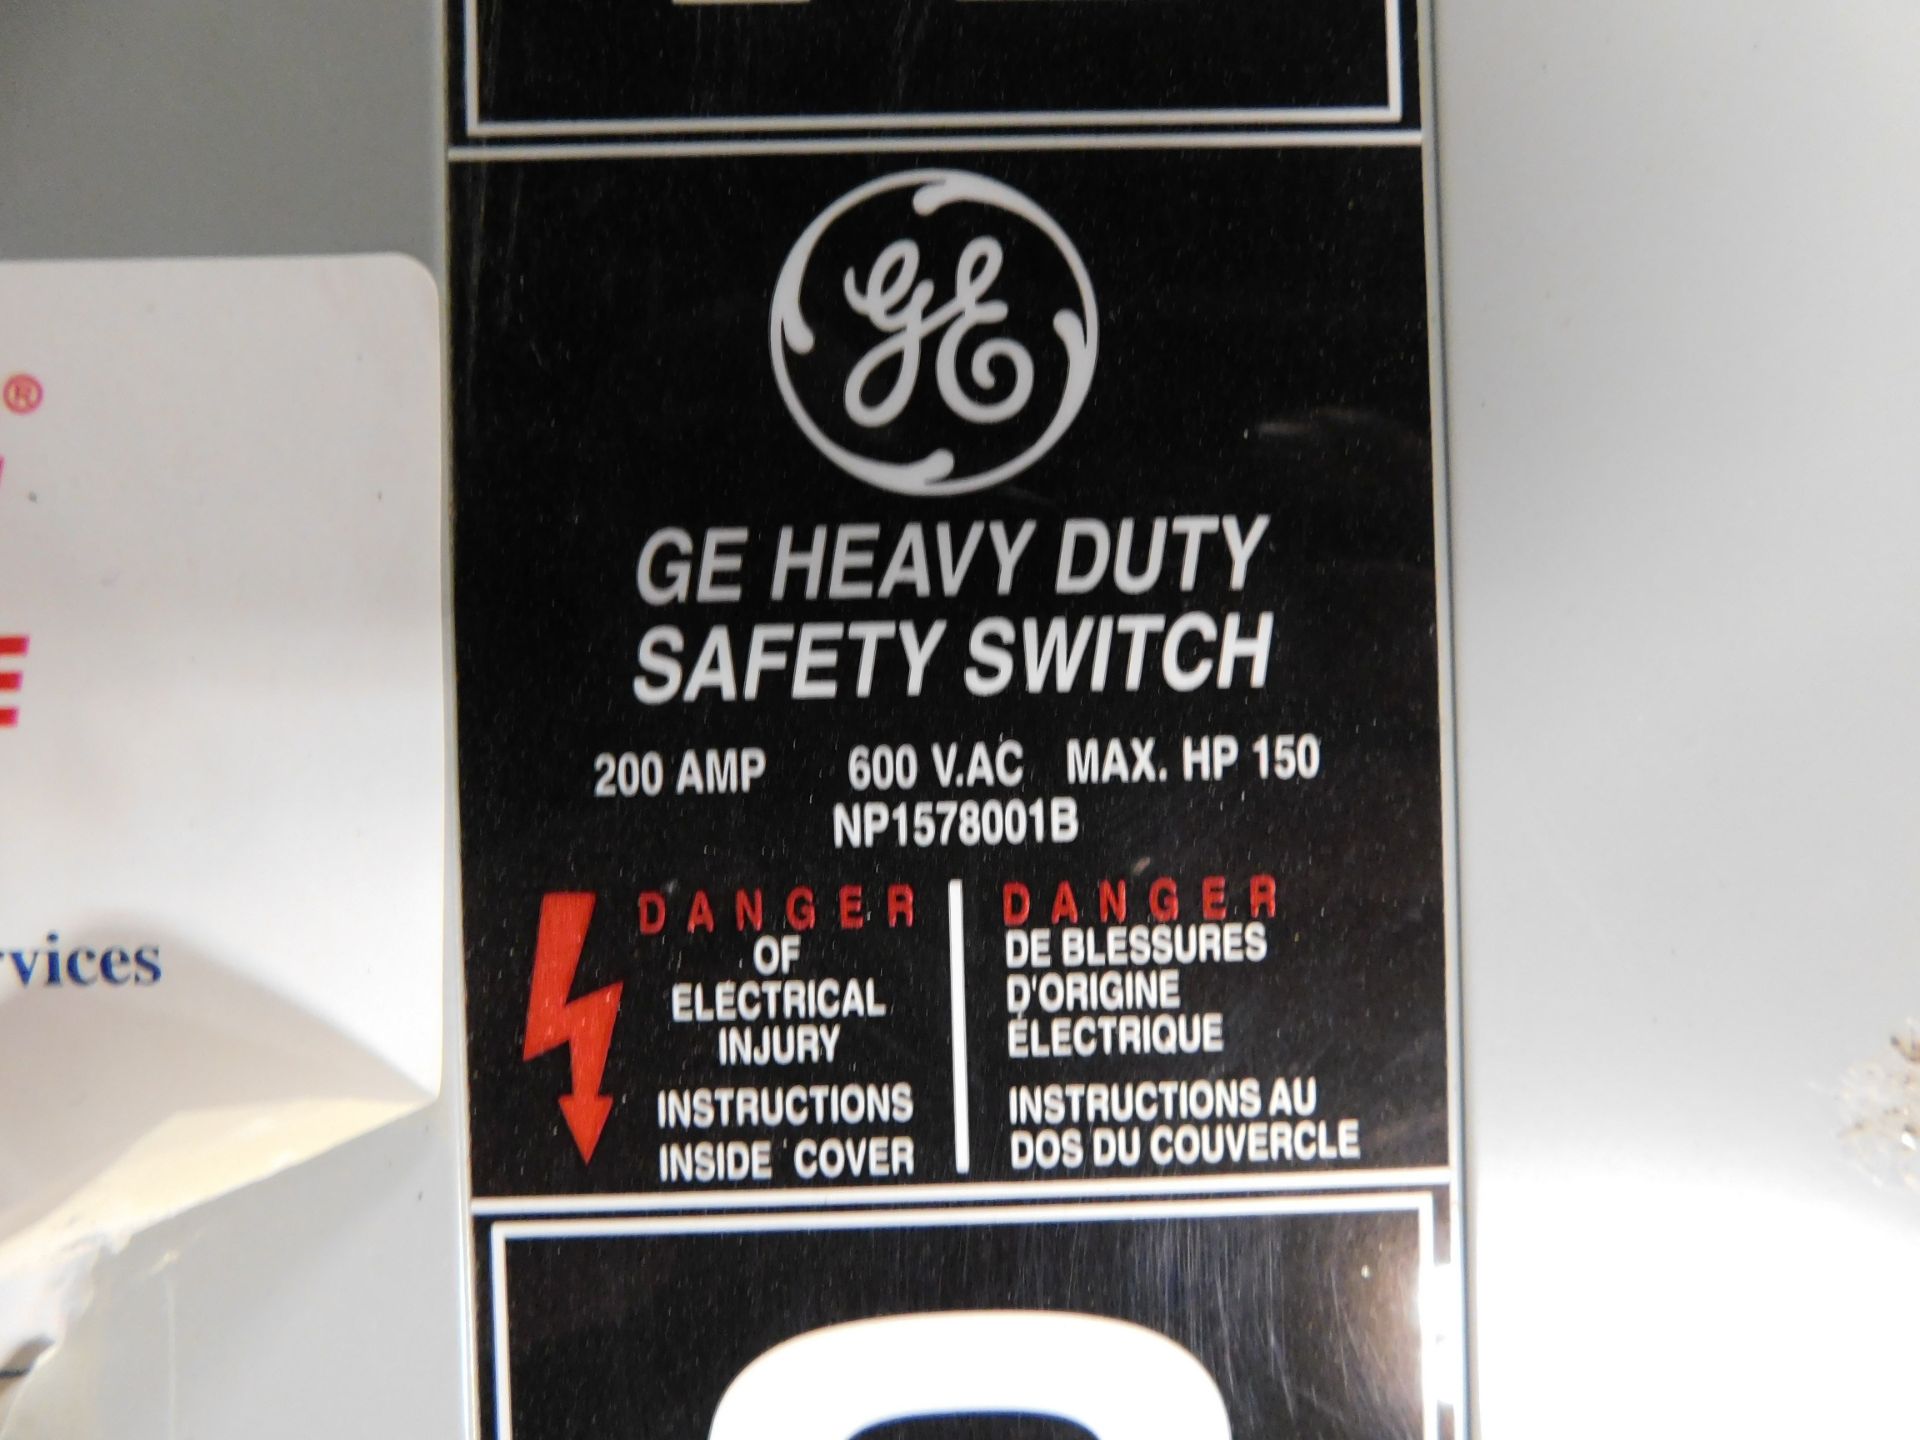 LOT OF (2) GE HEAVY DUTY SAFETY SWITCHES. 200 A. 600 VAC. 150 HP MAX. - Image 3 of 5